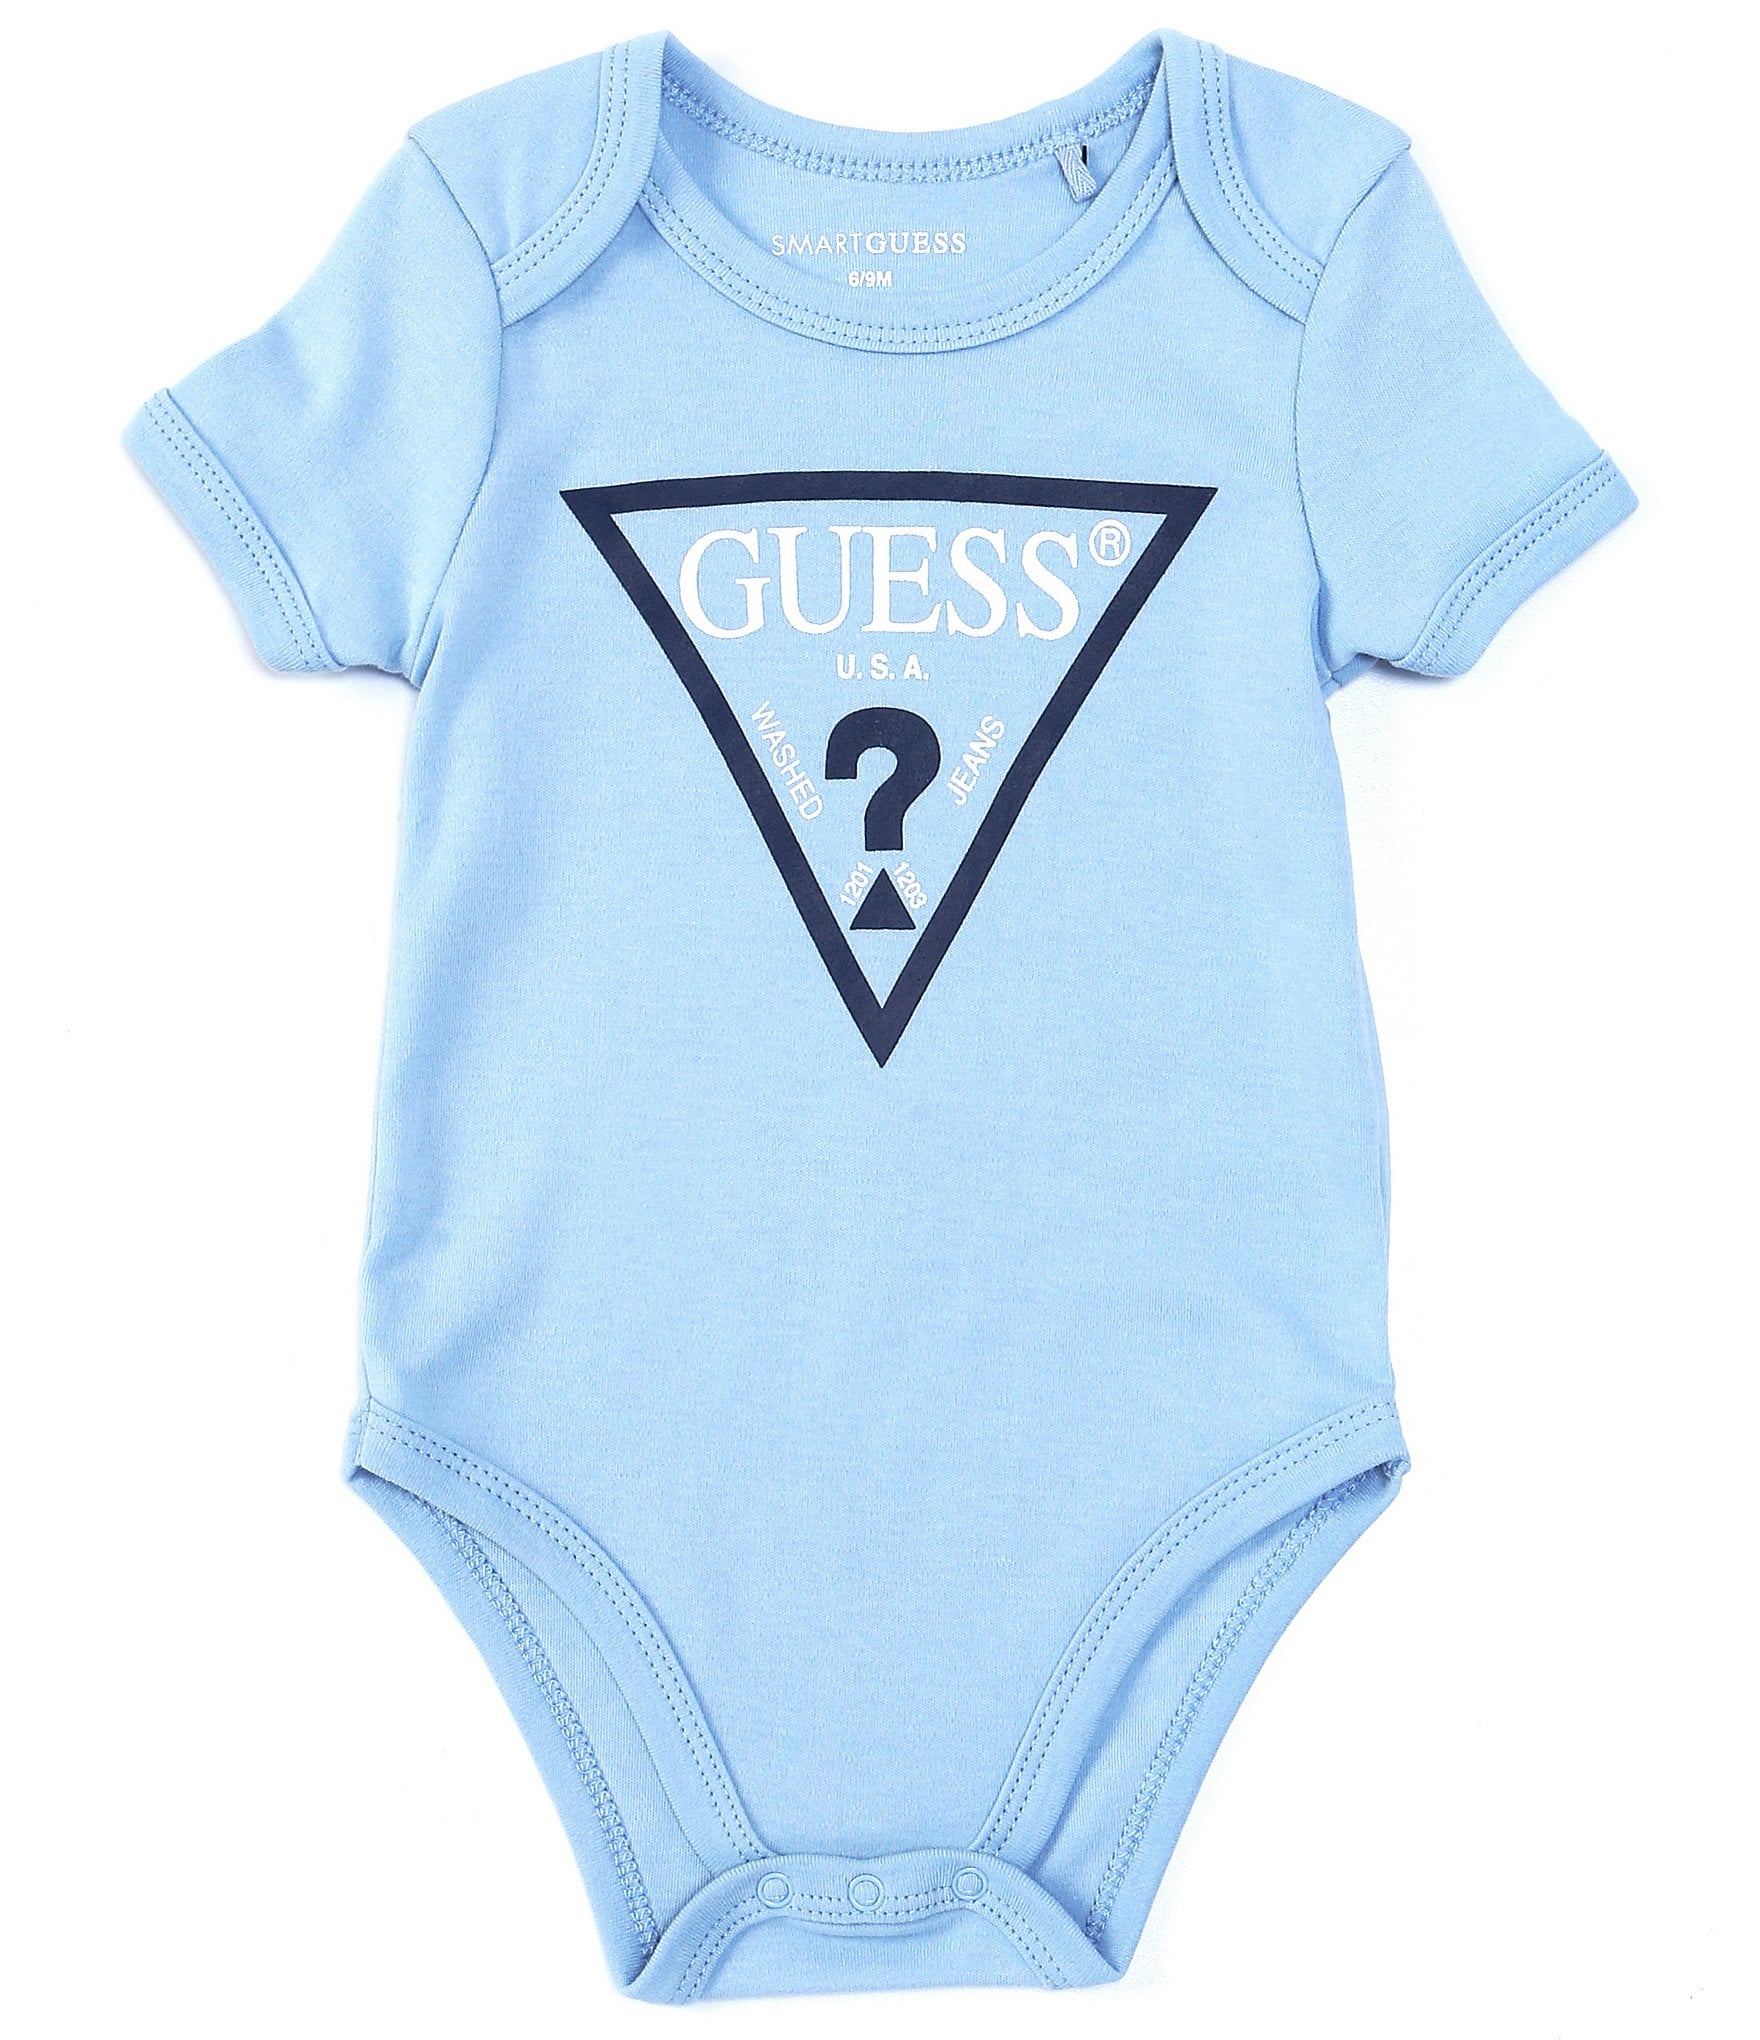 NEW GUESS BABY GIRL'S GUESS LOS ANGELES SHORT SLEEVE BODYSUIT. 6